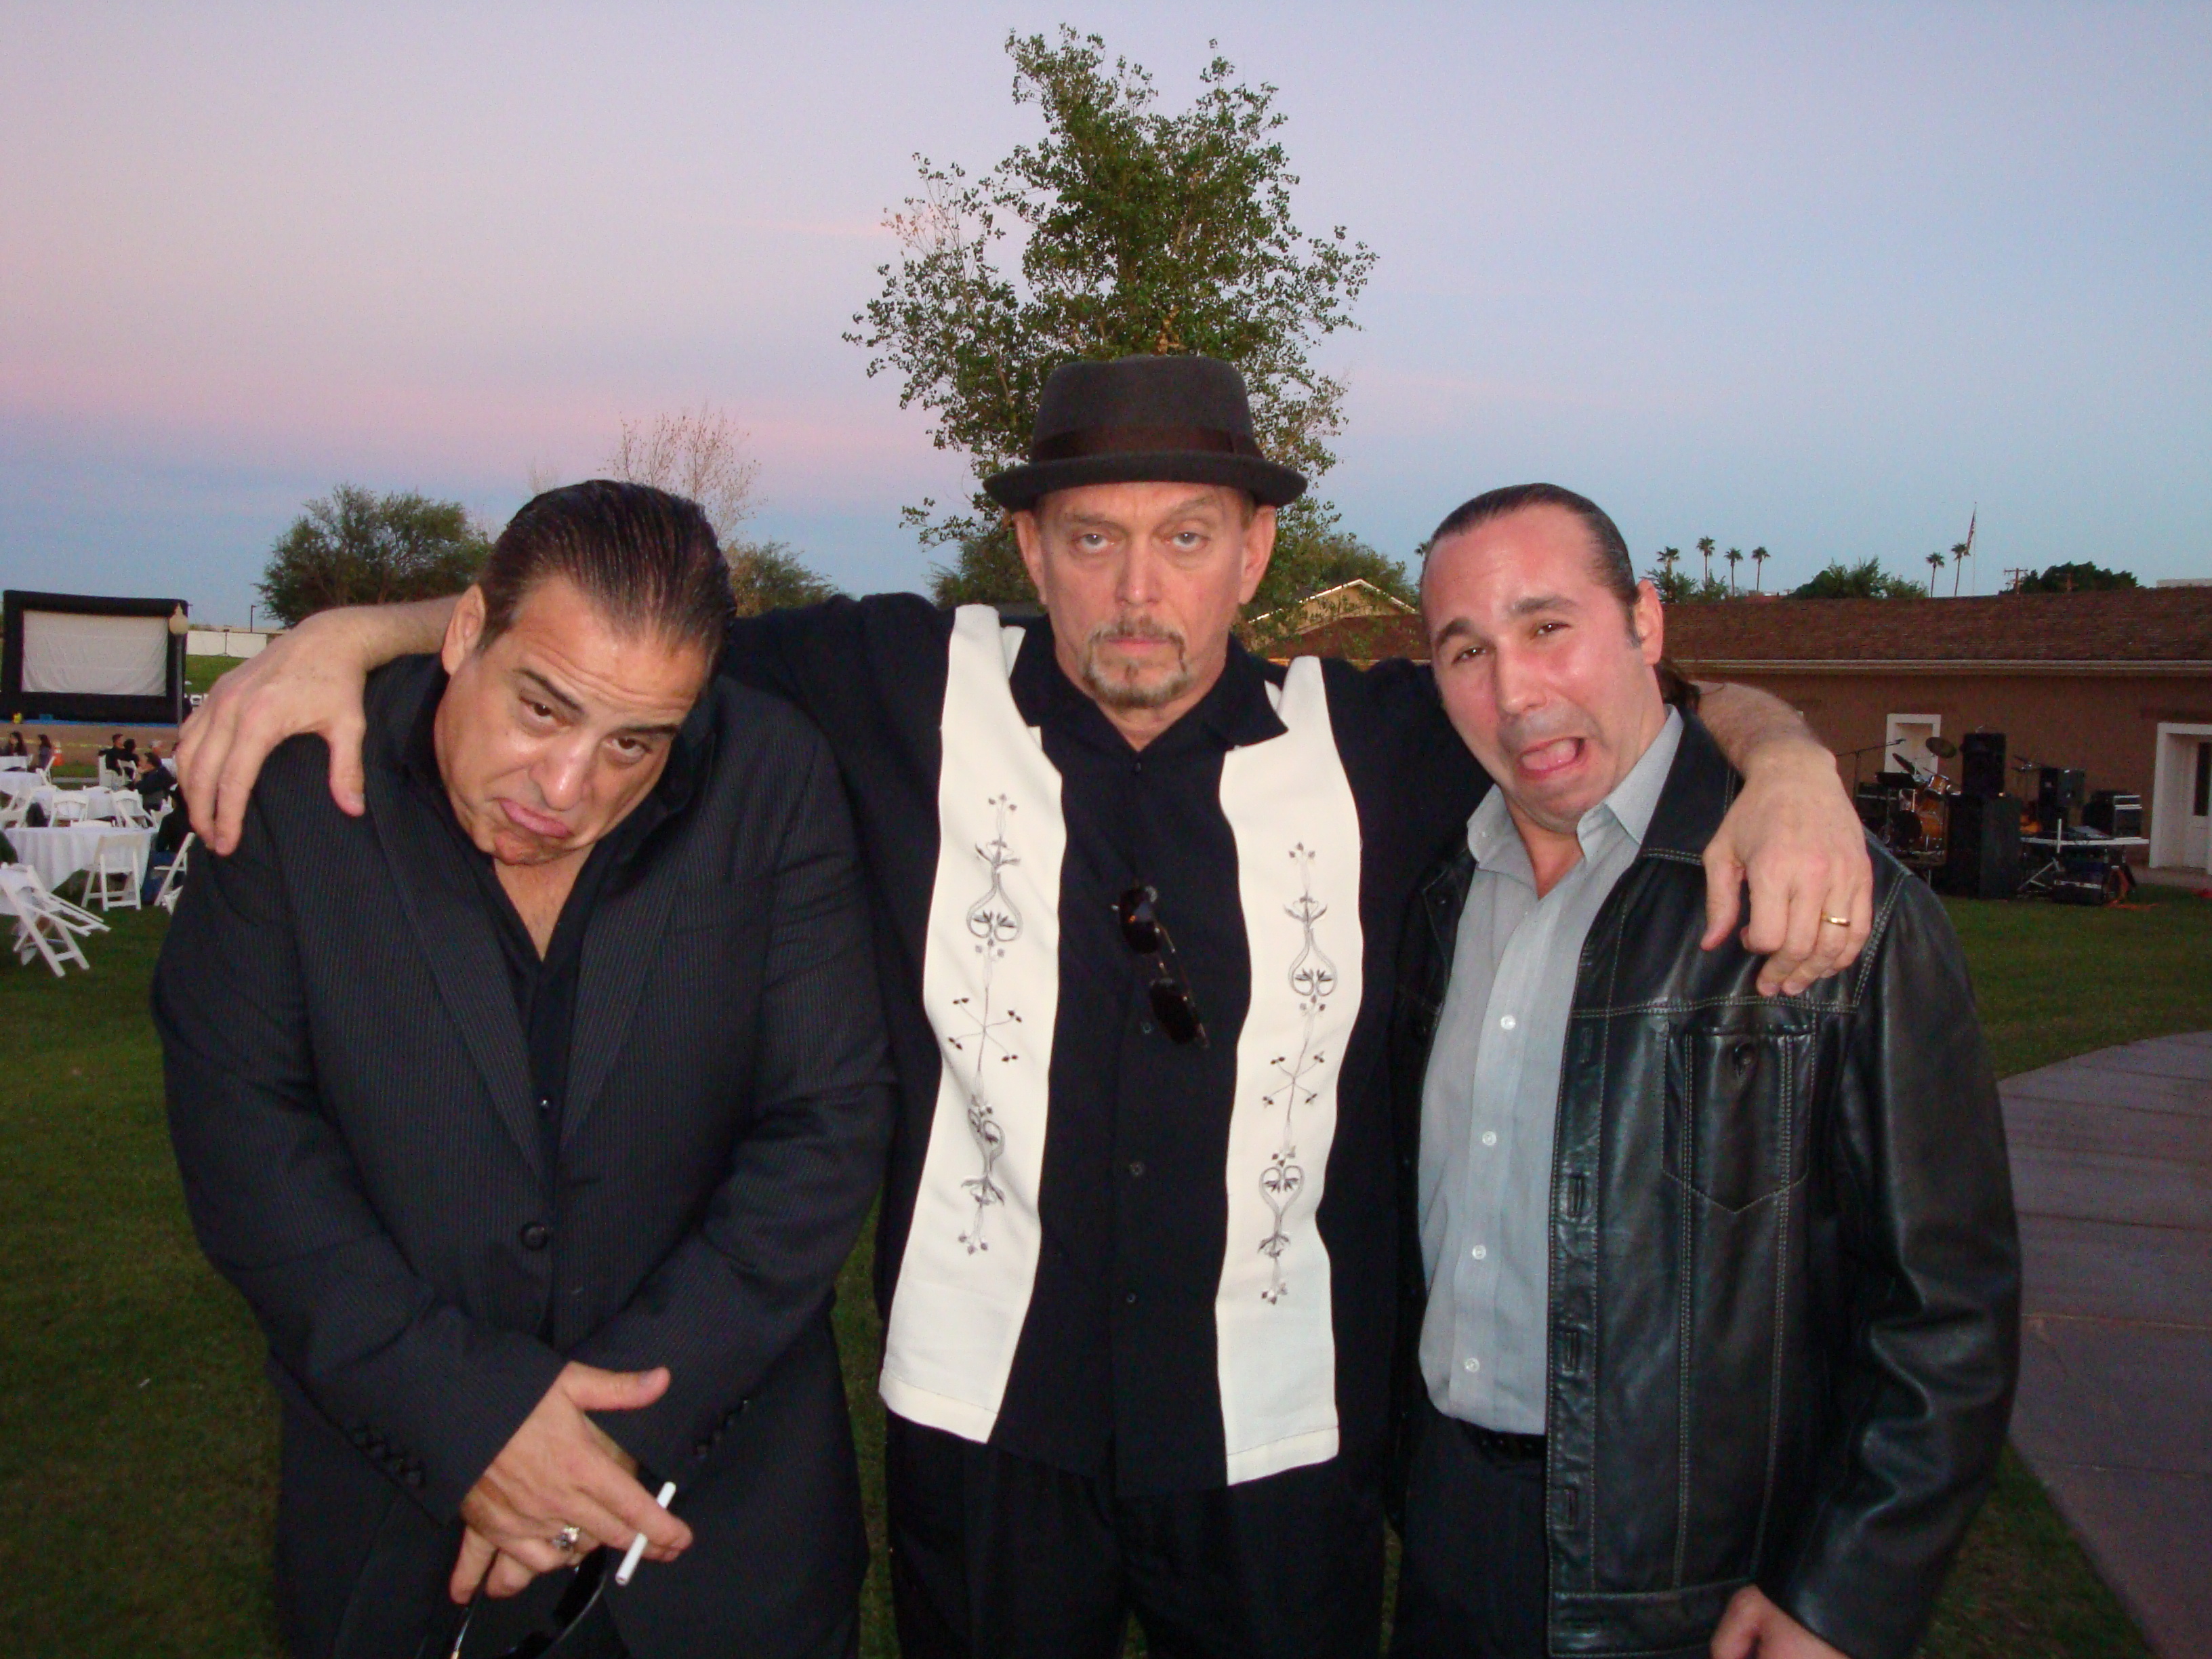 Actor-Director Anthony Hornus with actors Dean Mauro, left and Tommy Lynch at the World Premiere of Renovation in Yuma, Arizona. Dean is doing his Steven Van Zandt impression as Silvio from The Sopranos, while Tommy does a dead-on Robert De Niro.